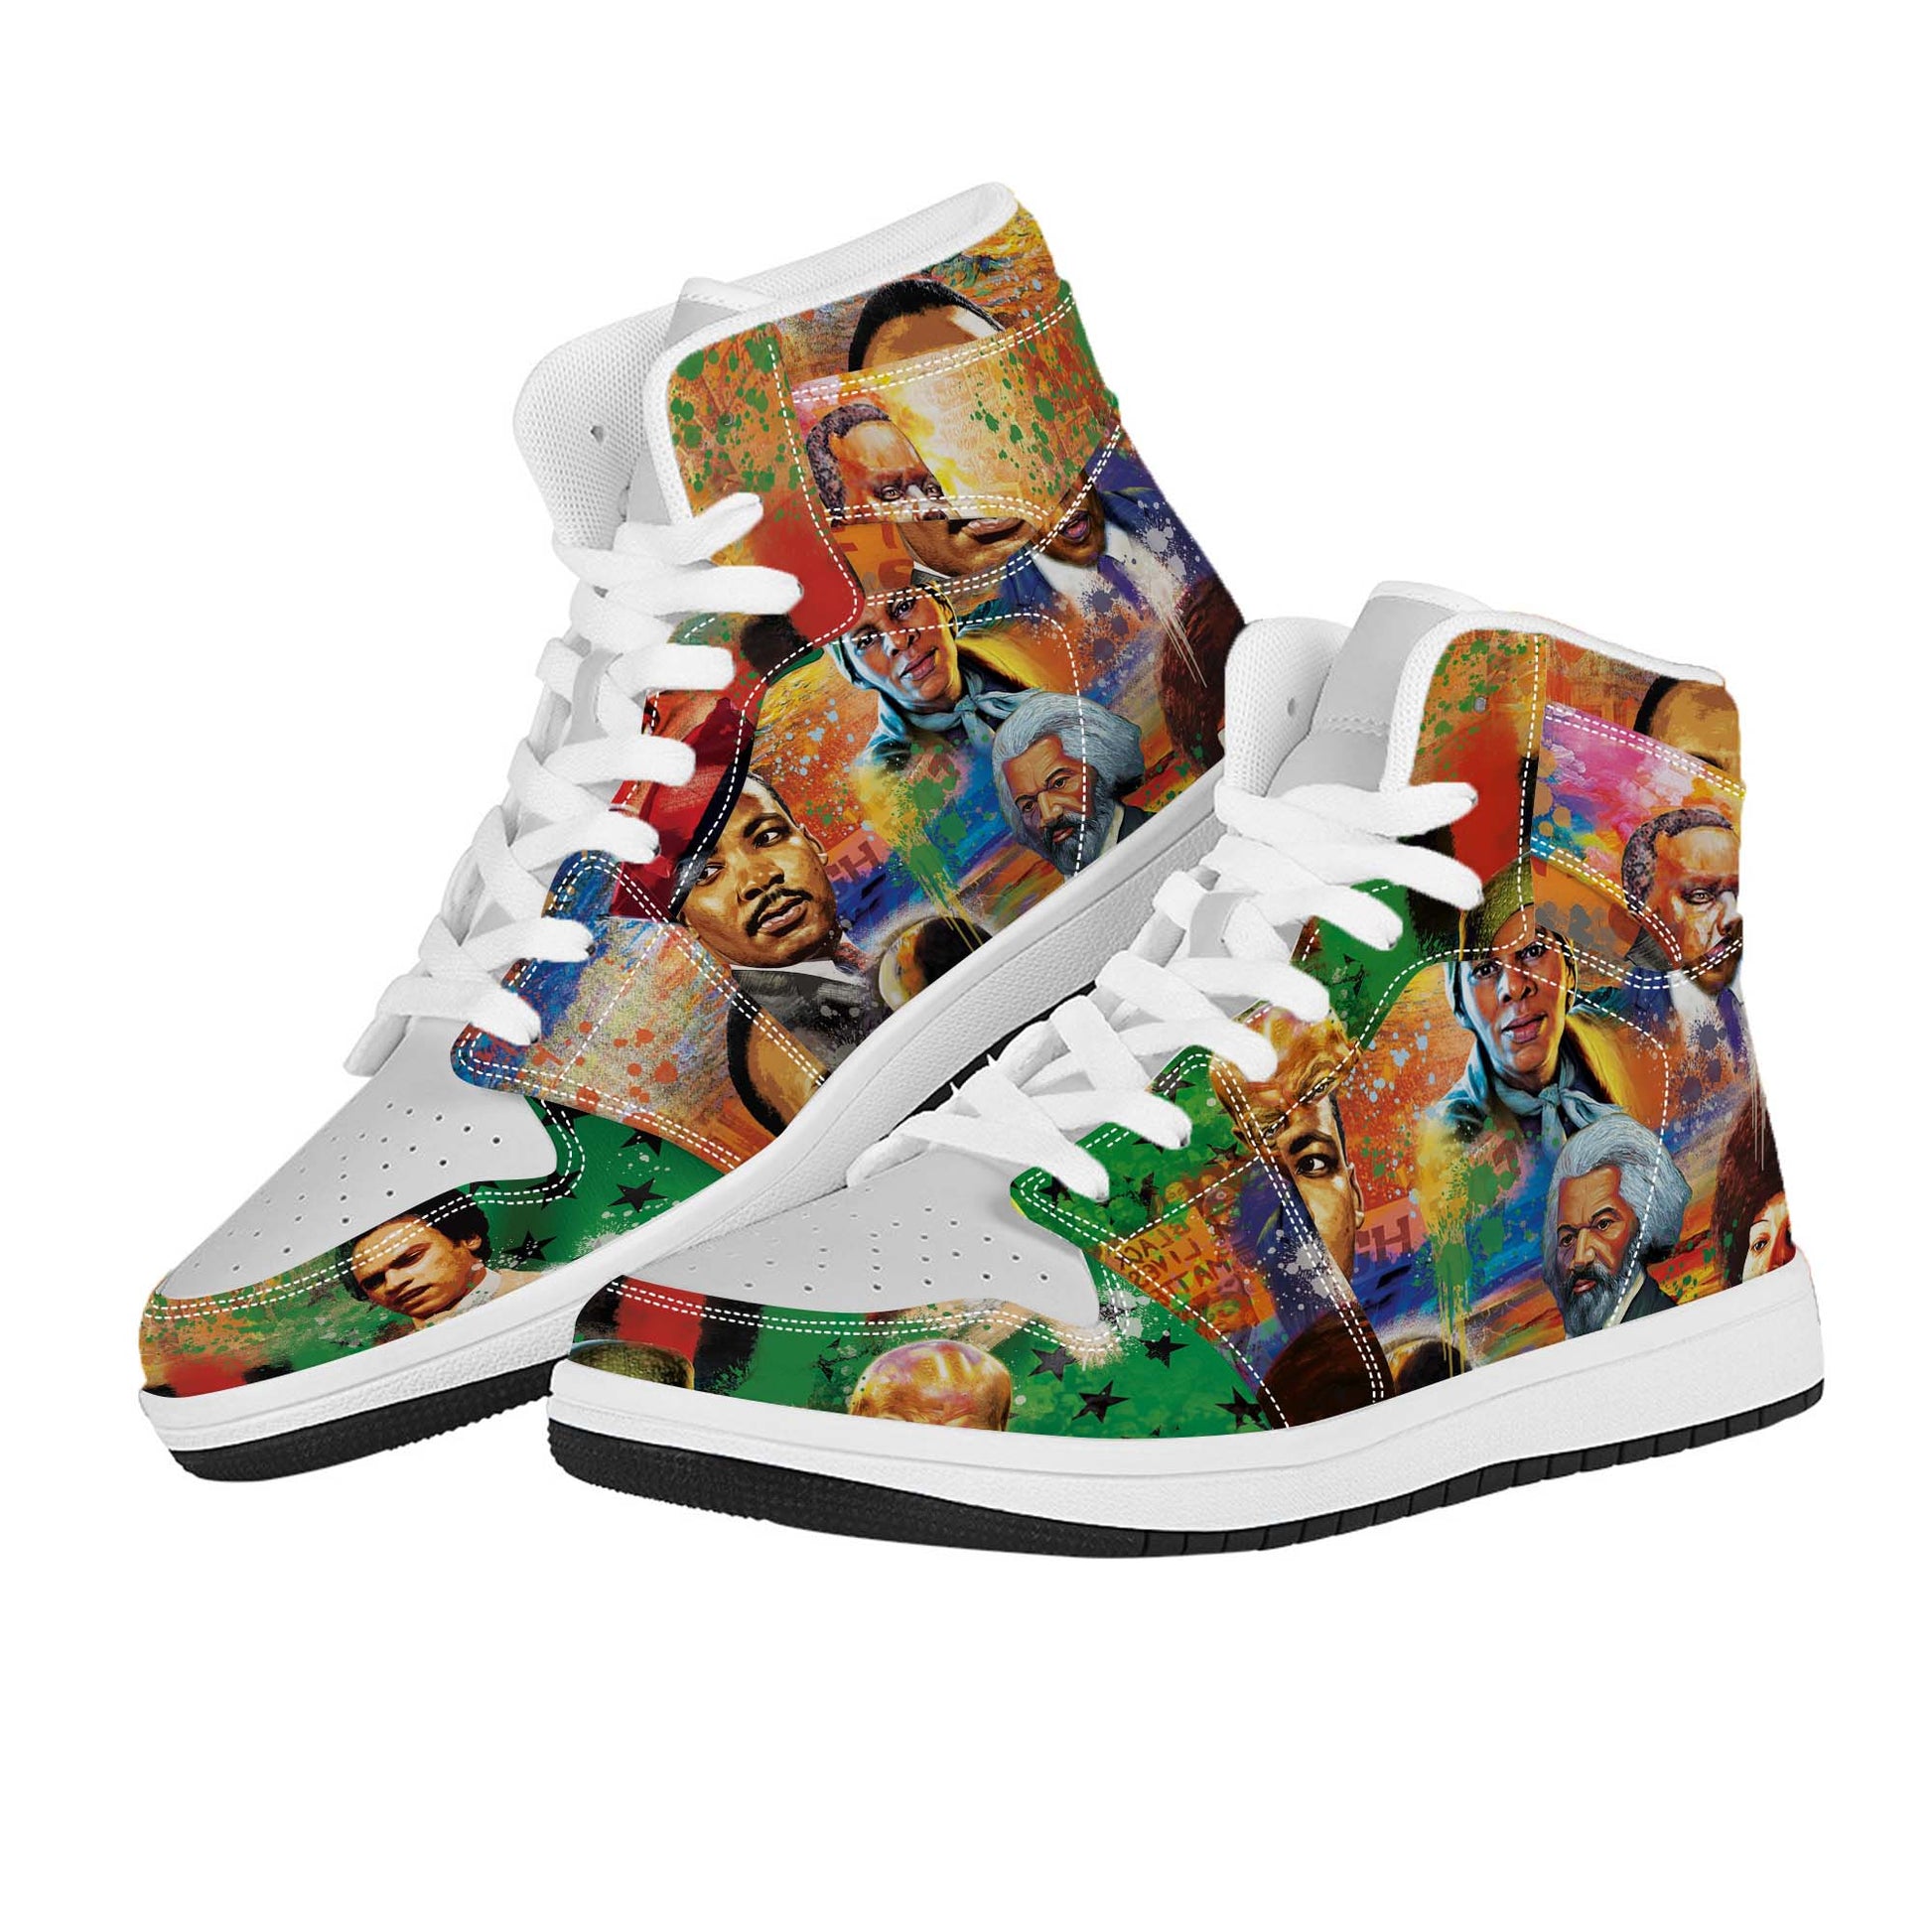 Civil Rights Moments High Top Sneakers High Top Sneakers Tianci 